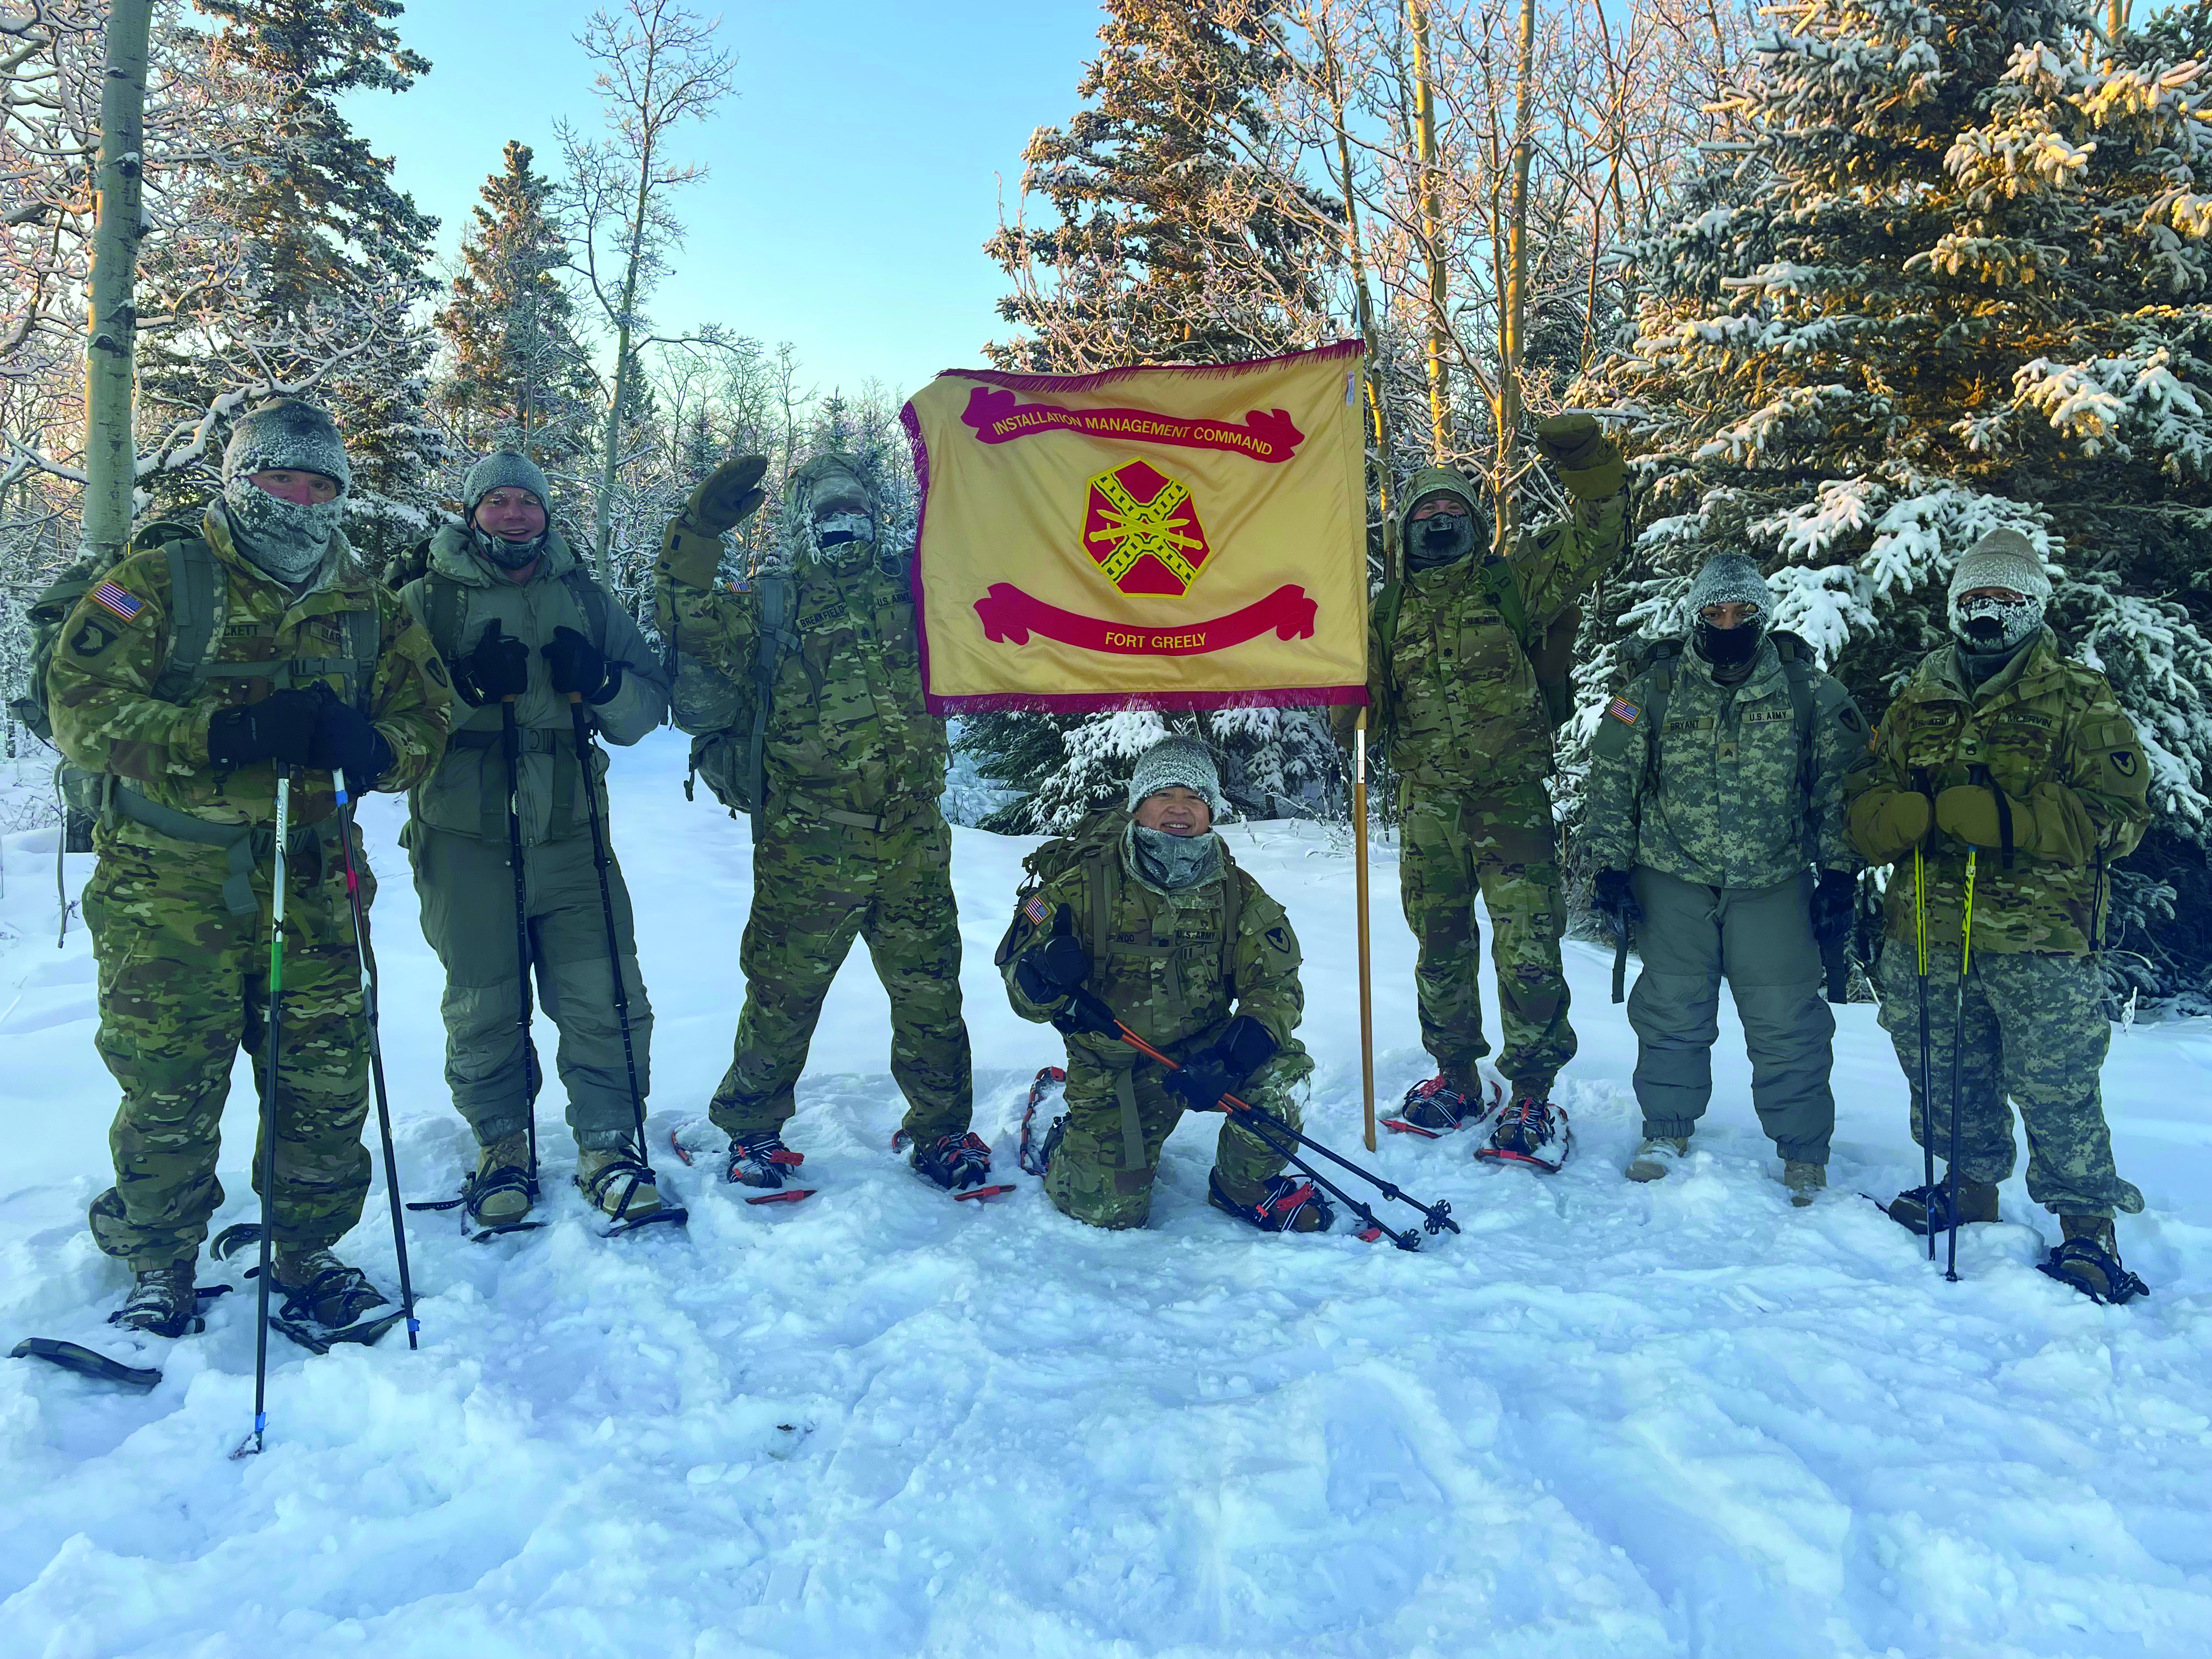 In November 2021, command judge advocate CPT Charley Eiser (second from the left) conducted a snowshoe hike with the Fort Greely, Alaska Garrison Command Team. The conditions on Fort Greely’s Bison Trail that morning included temperatures dropping down to -32 degrees!